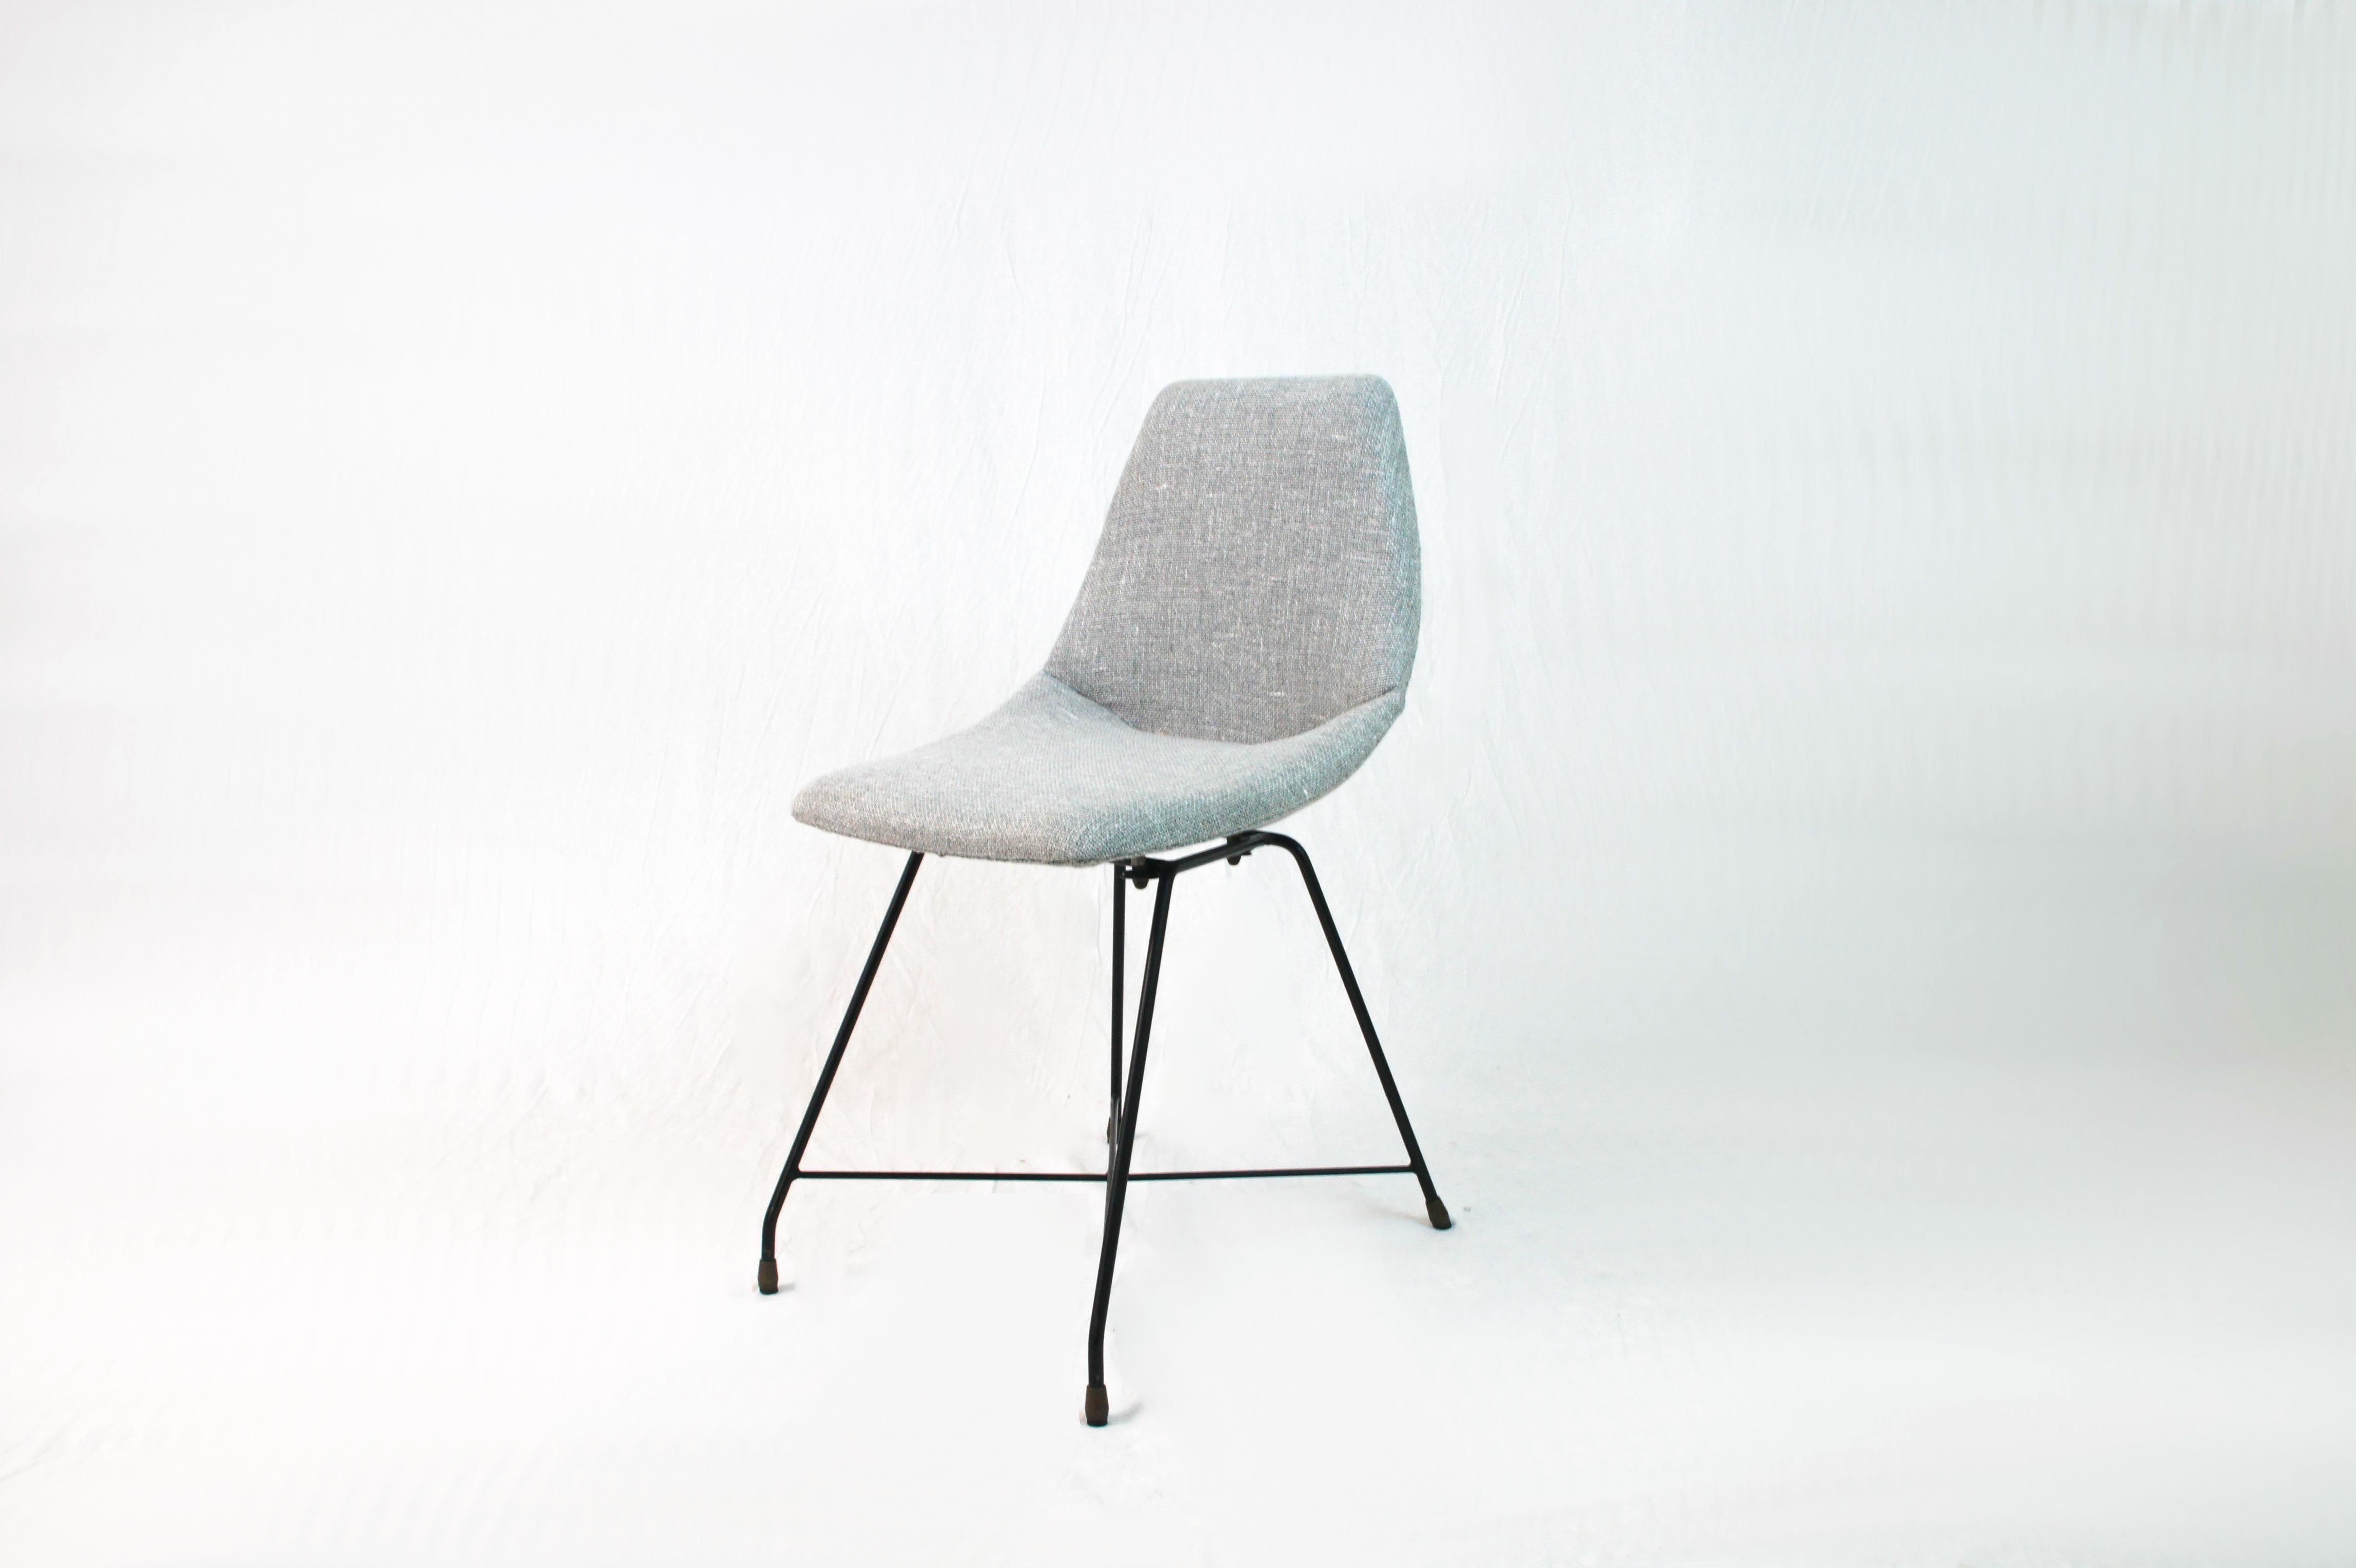 aster chair designed by augusto bozzi and produced by saporiti brothers. 
italian chair from the 1950s, reupholstered by us with fabric in white gray melange color.
lacquered metal base with time-burnished brass details.
cozy seat with a light and